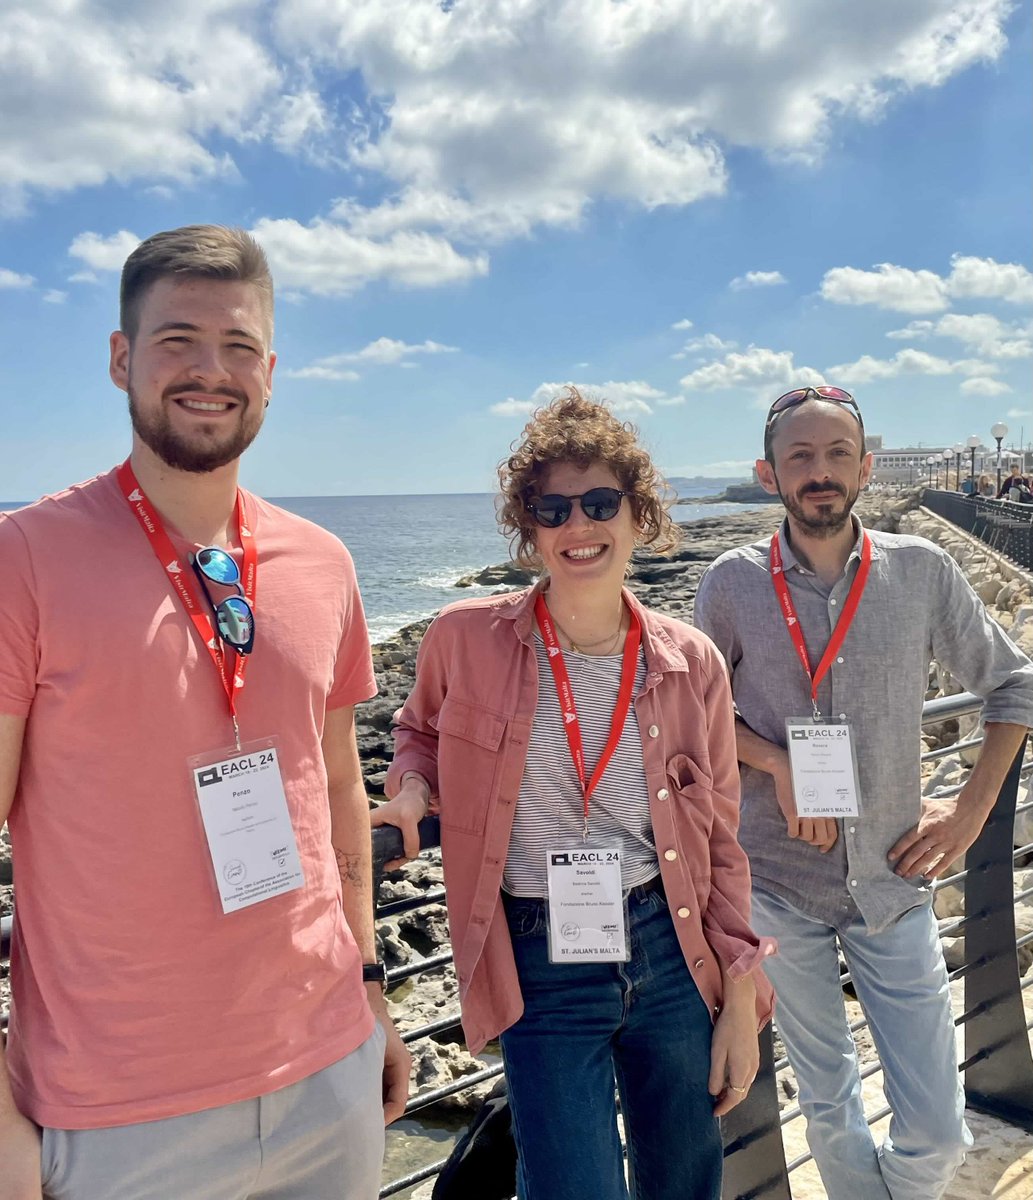 The @FBK_research crew is ready to rock in sunny Malta at #EACL2024! @penzo_nicolo @BeatriceSavoldi & Marco Rovera @fbk_mt